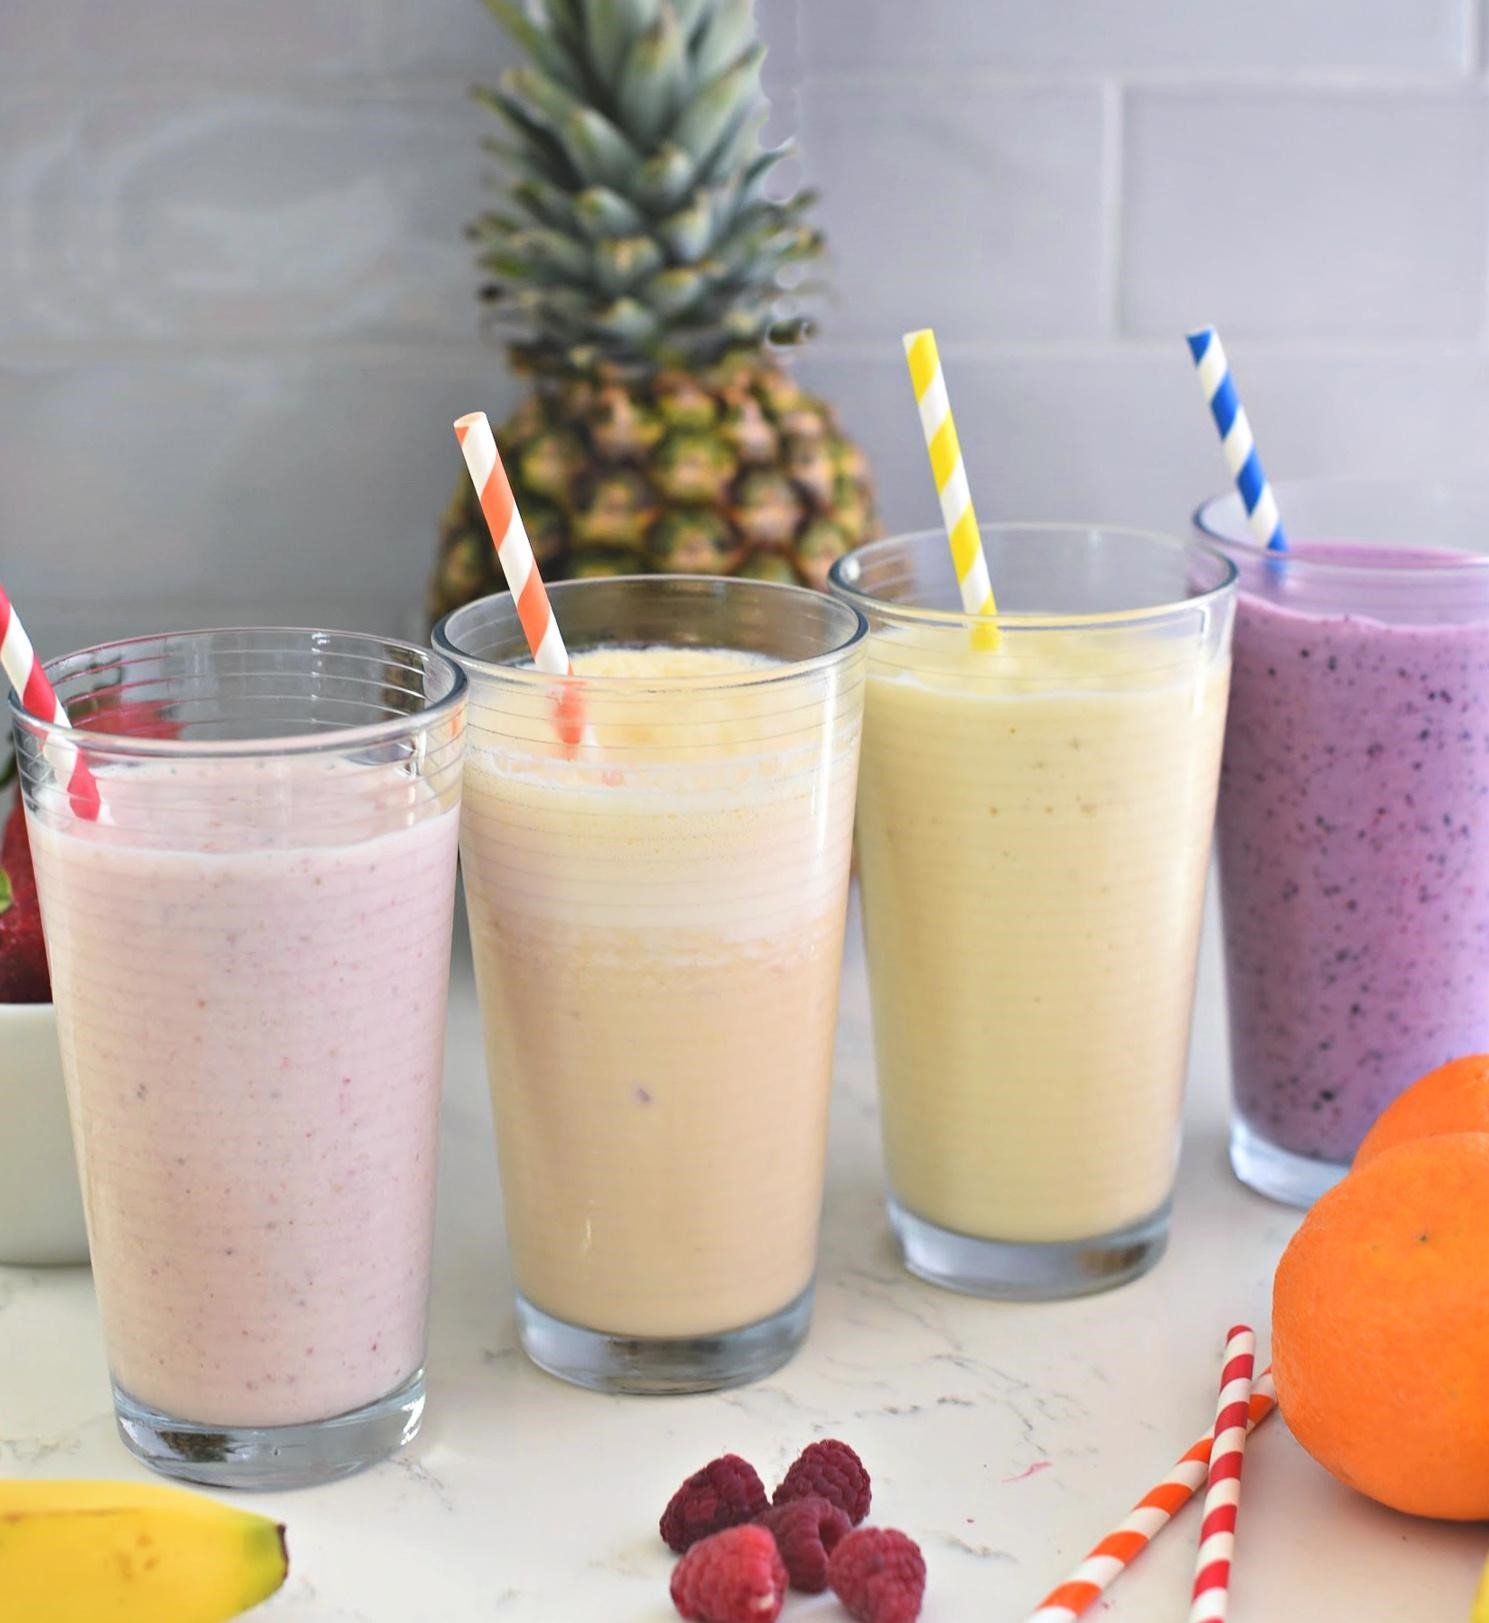 16 Irresistibly Yummy Smoothie Recipes For Kids And Toddlers